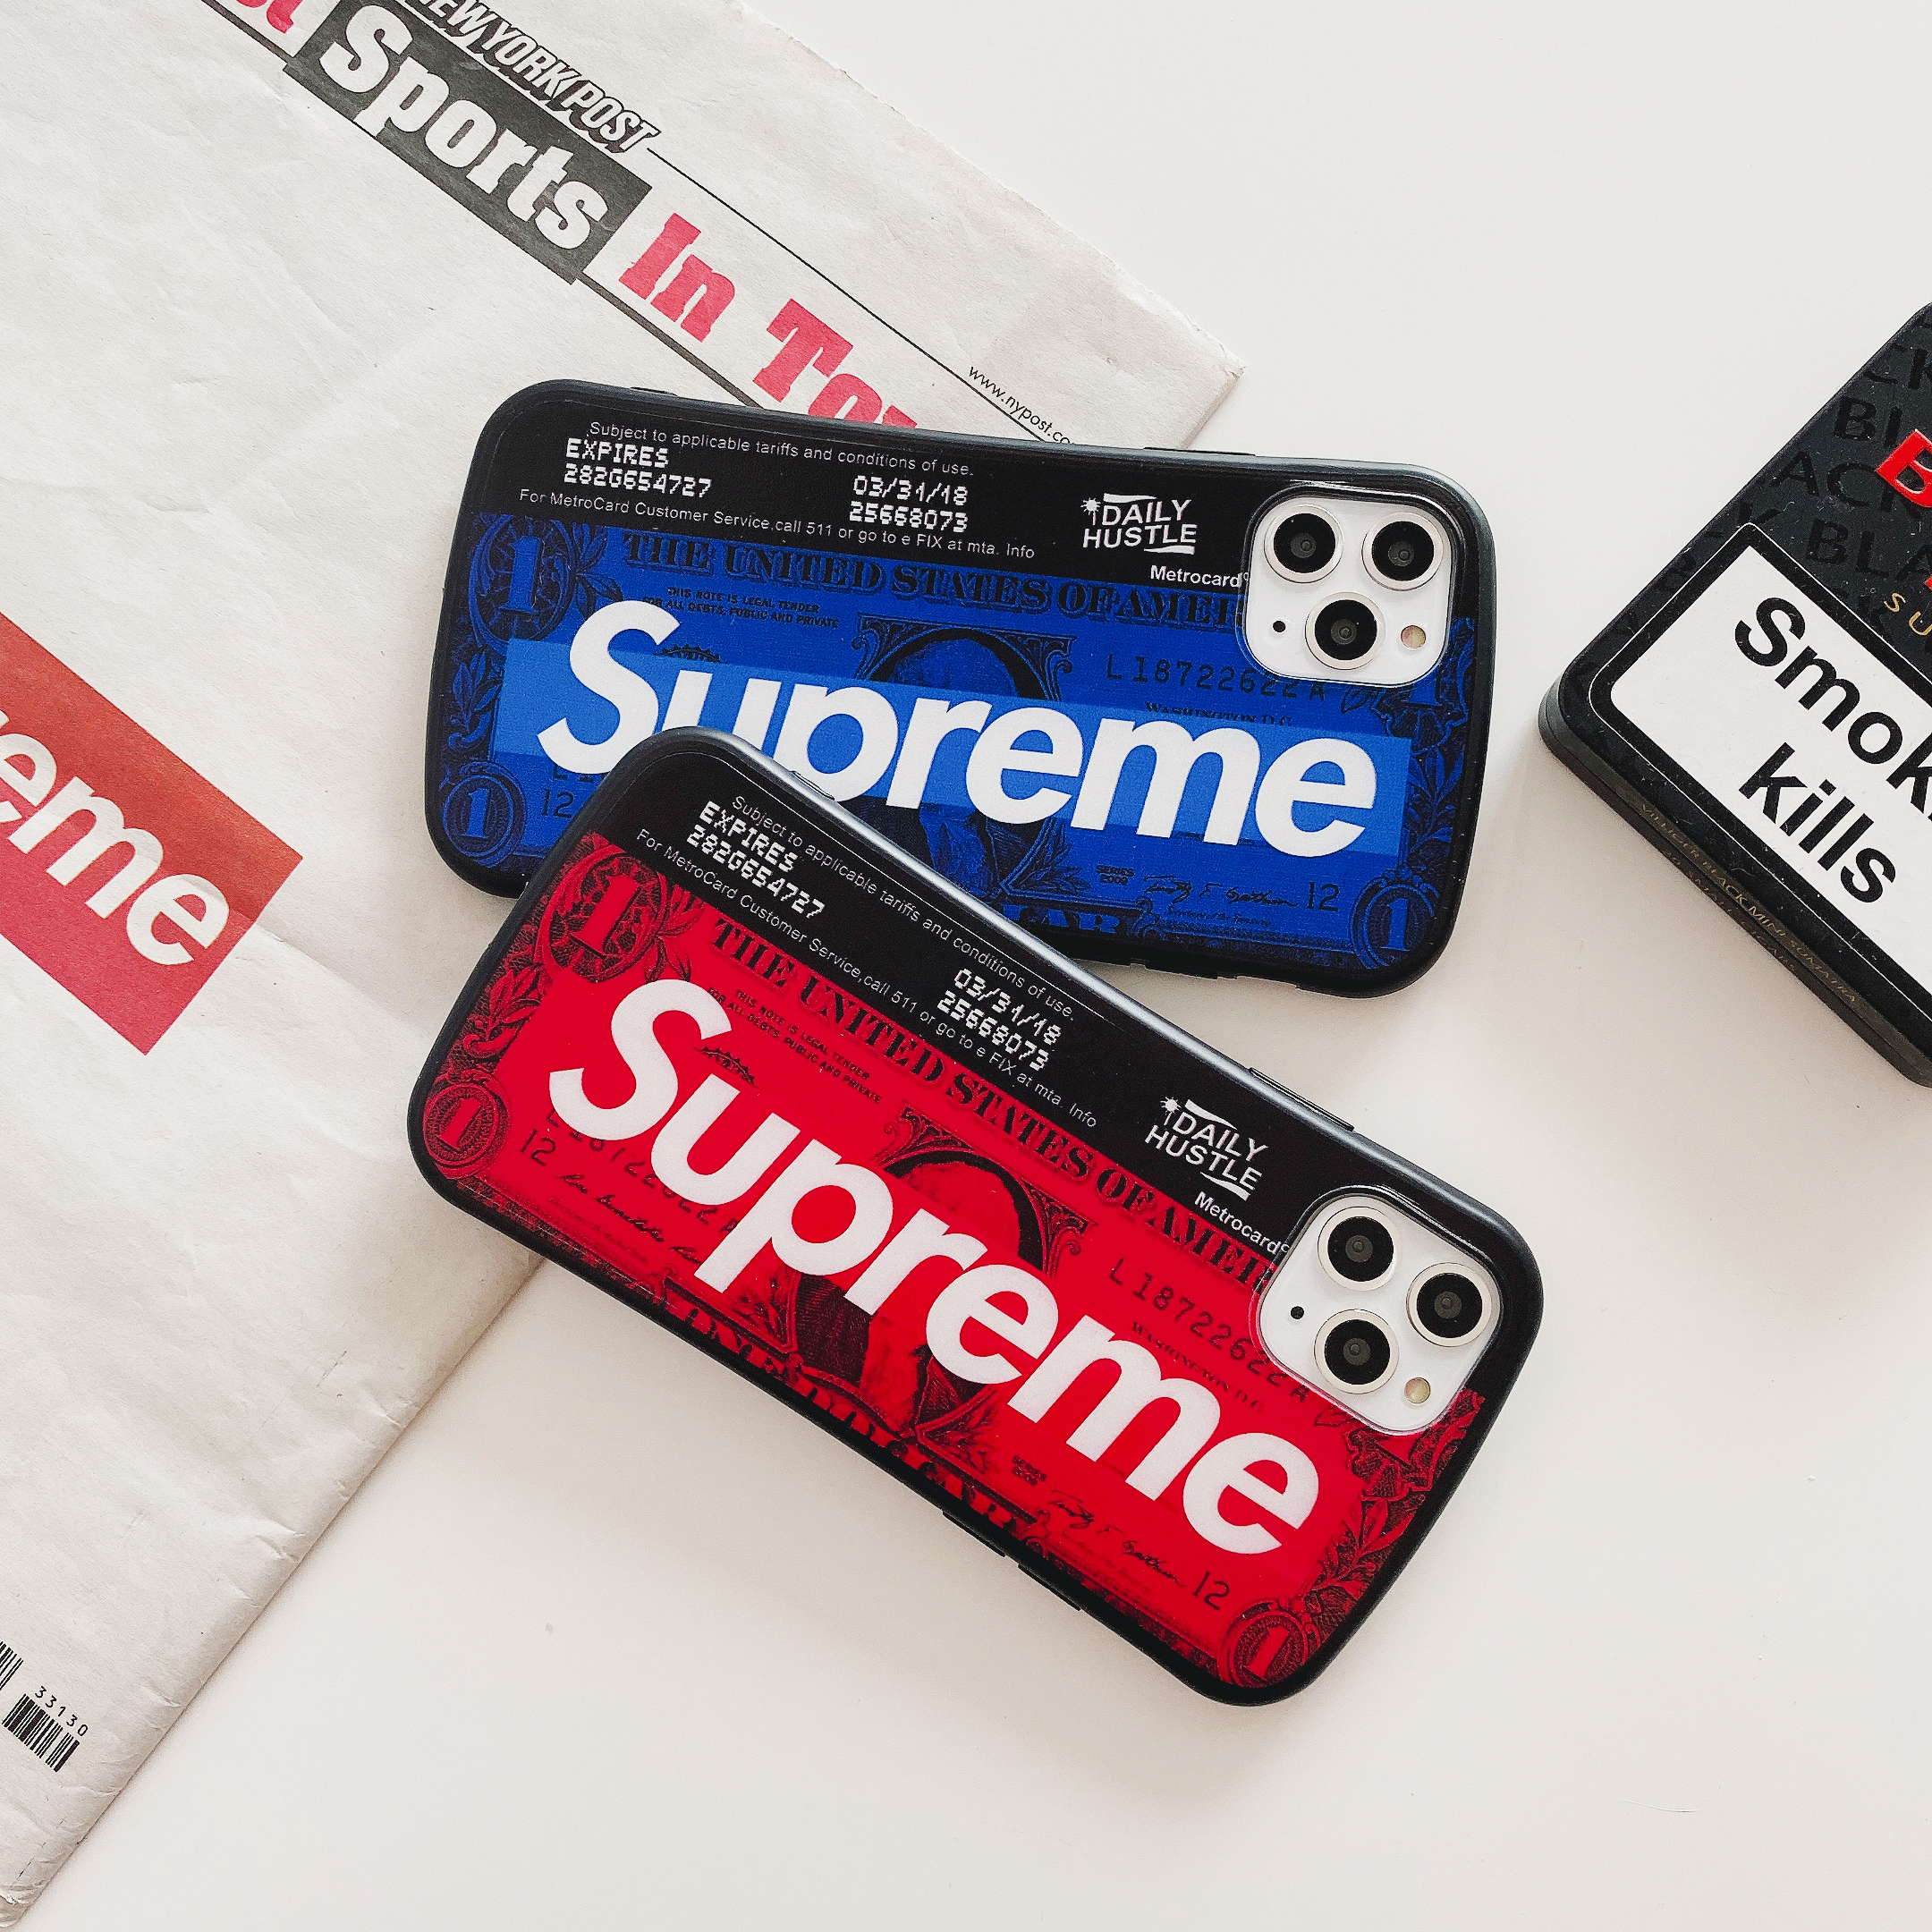 Supreme iPhone Cases for iPhone 11